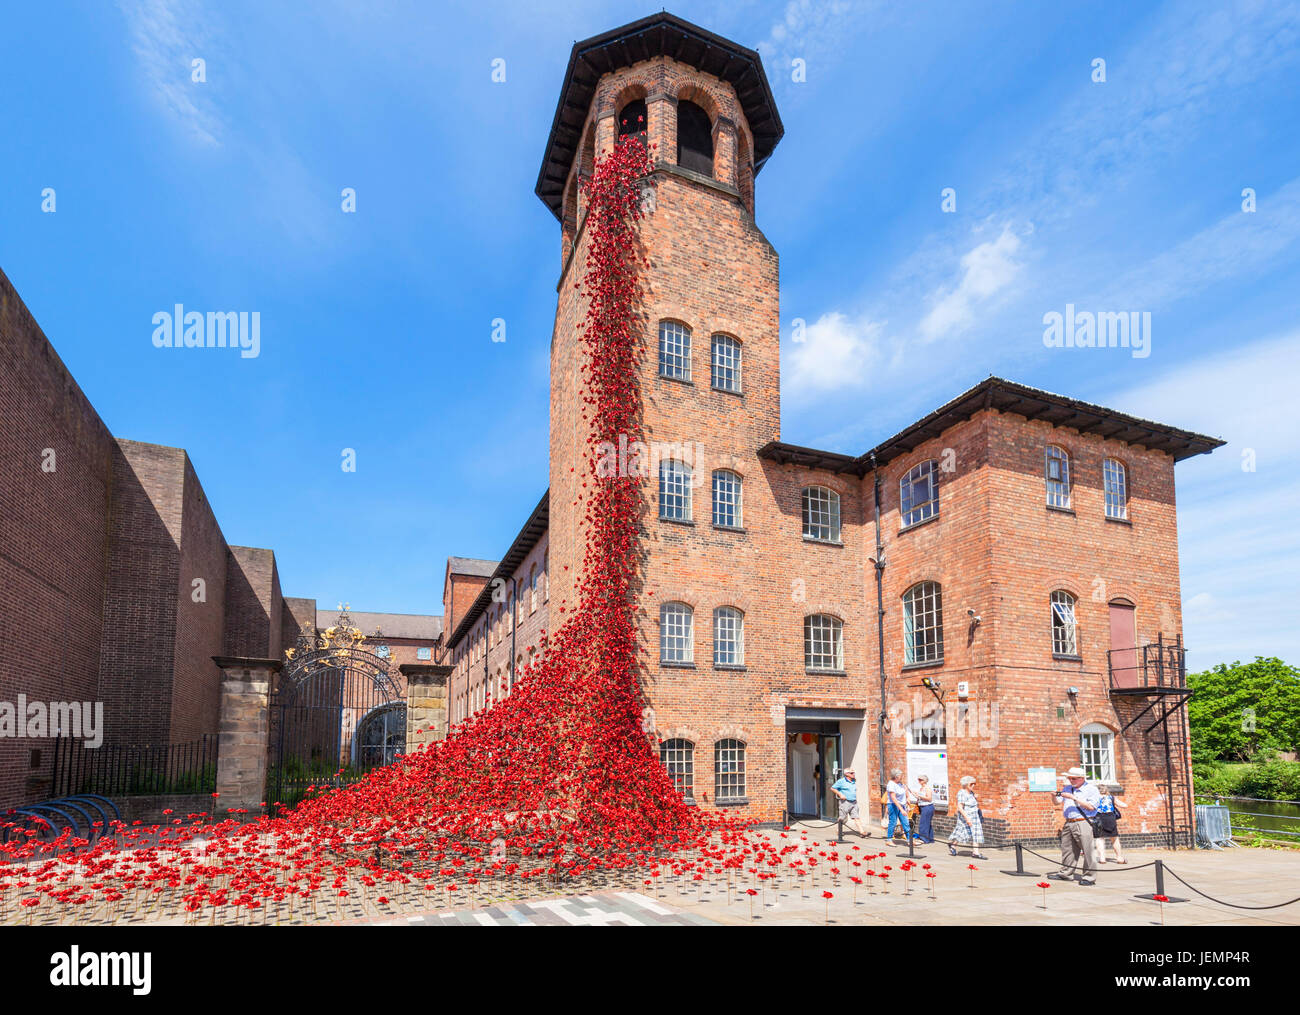 Derby Silk Mill Poppies Weeping Window Exhibition by Paul Cummings at Derby Silk Mill June 2017 Derby city centre Derbyshire England GB UK Europe Stock Photo